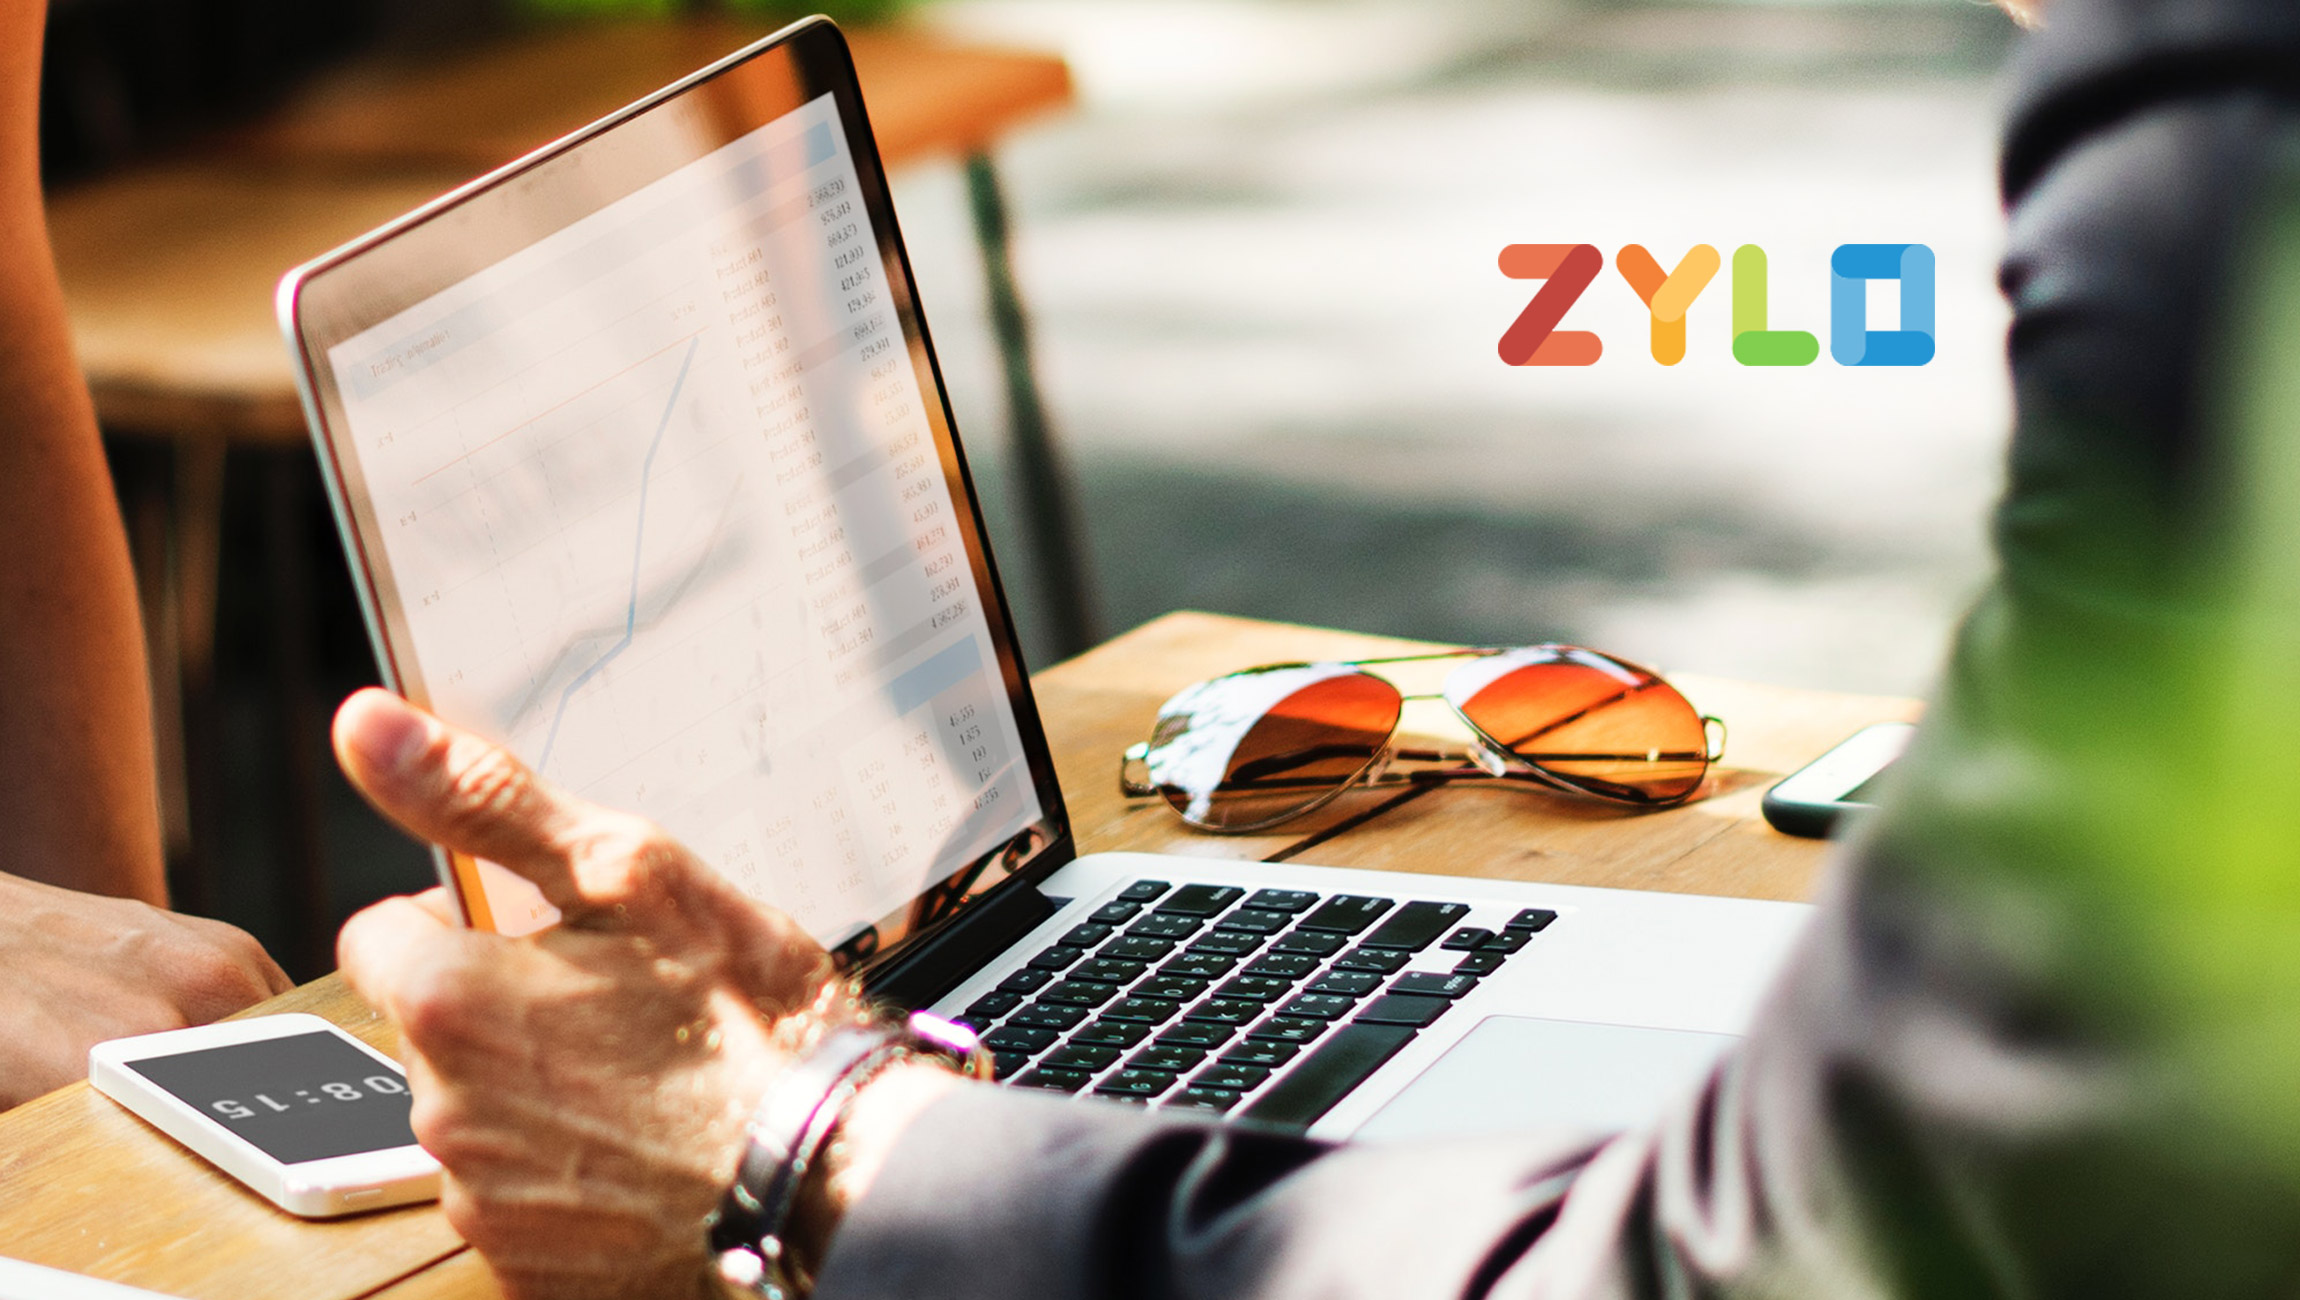 Zylo Launches Managed Services to Help Customers Establish Mature SaaS Management Practices